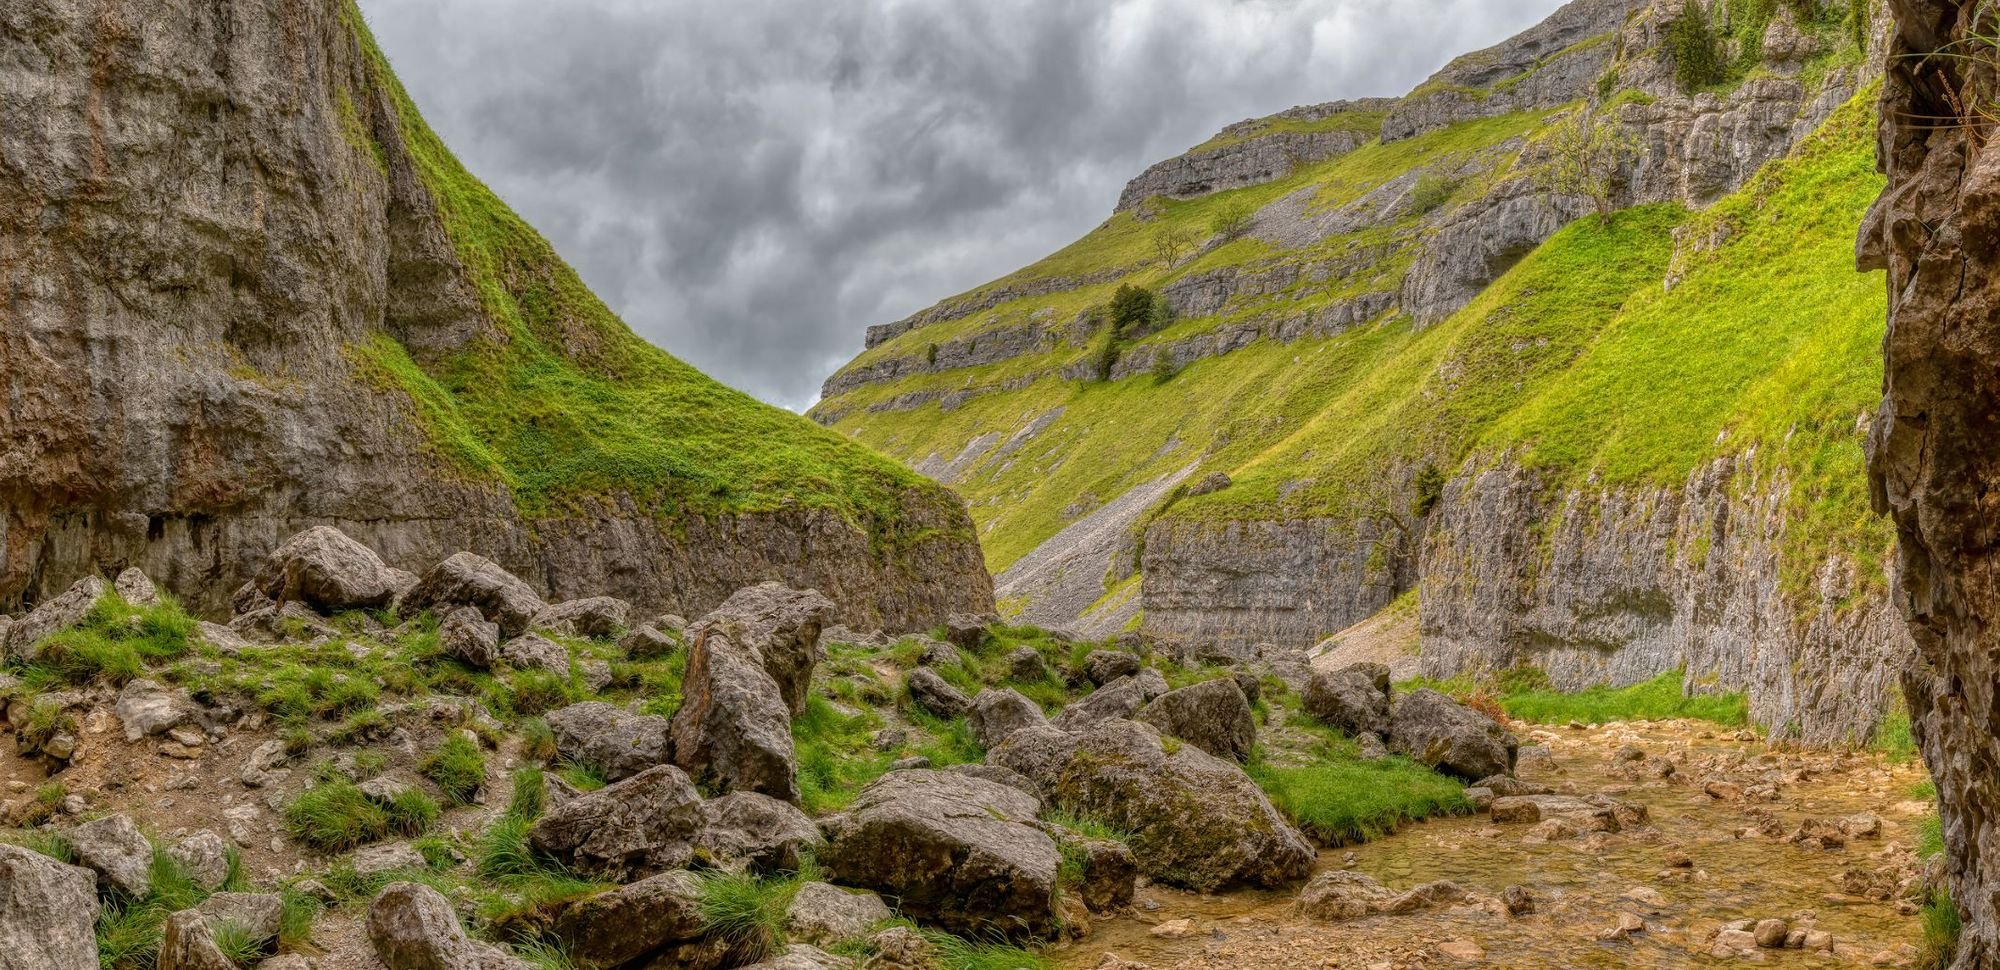 Gordale Scar, in the Yorkshire Dales. Photo: Getty.